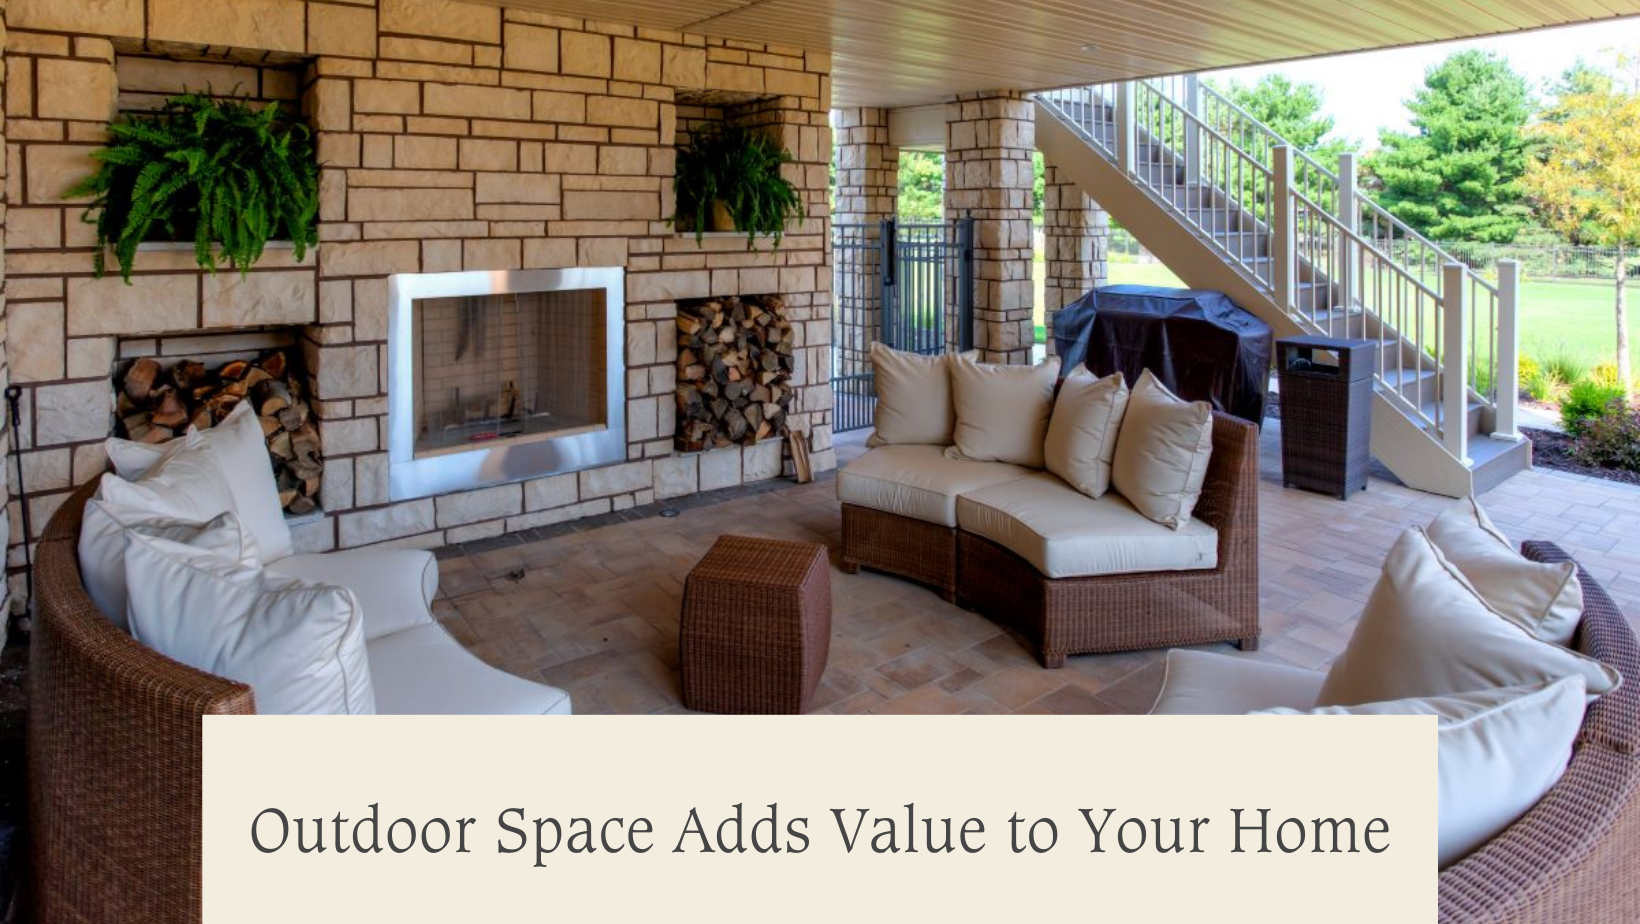 Outdoor Living Space Adds Value to the Home